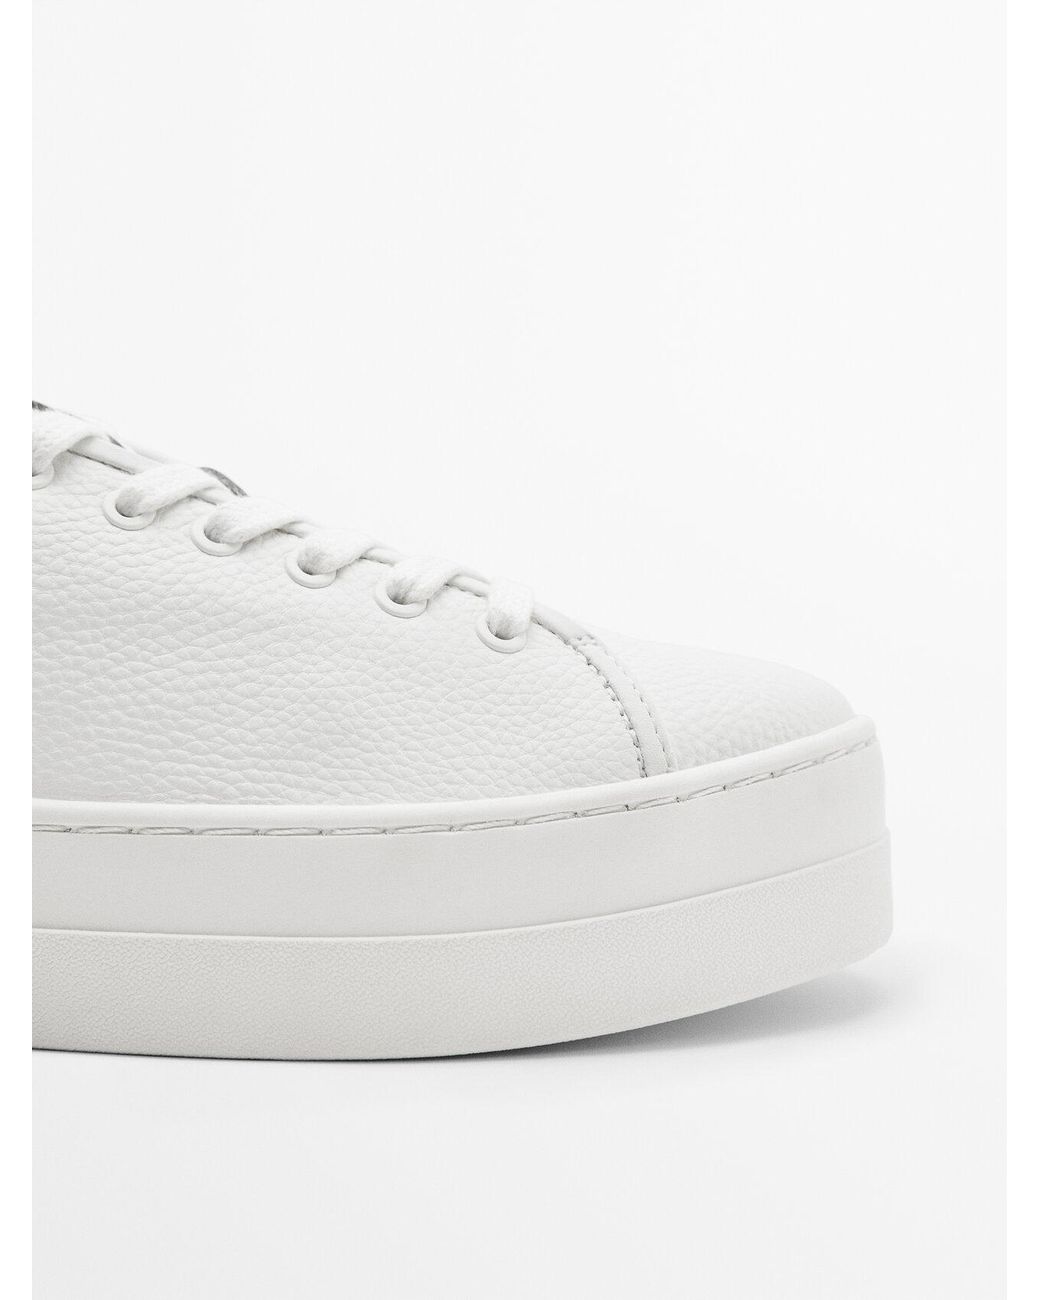 MASSIMO DUTTI Leather Platform Trainers in White | Lyst